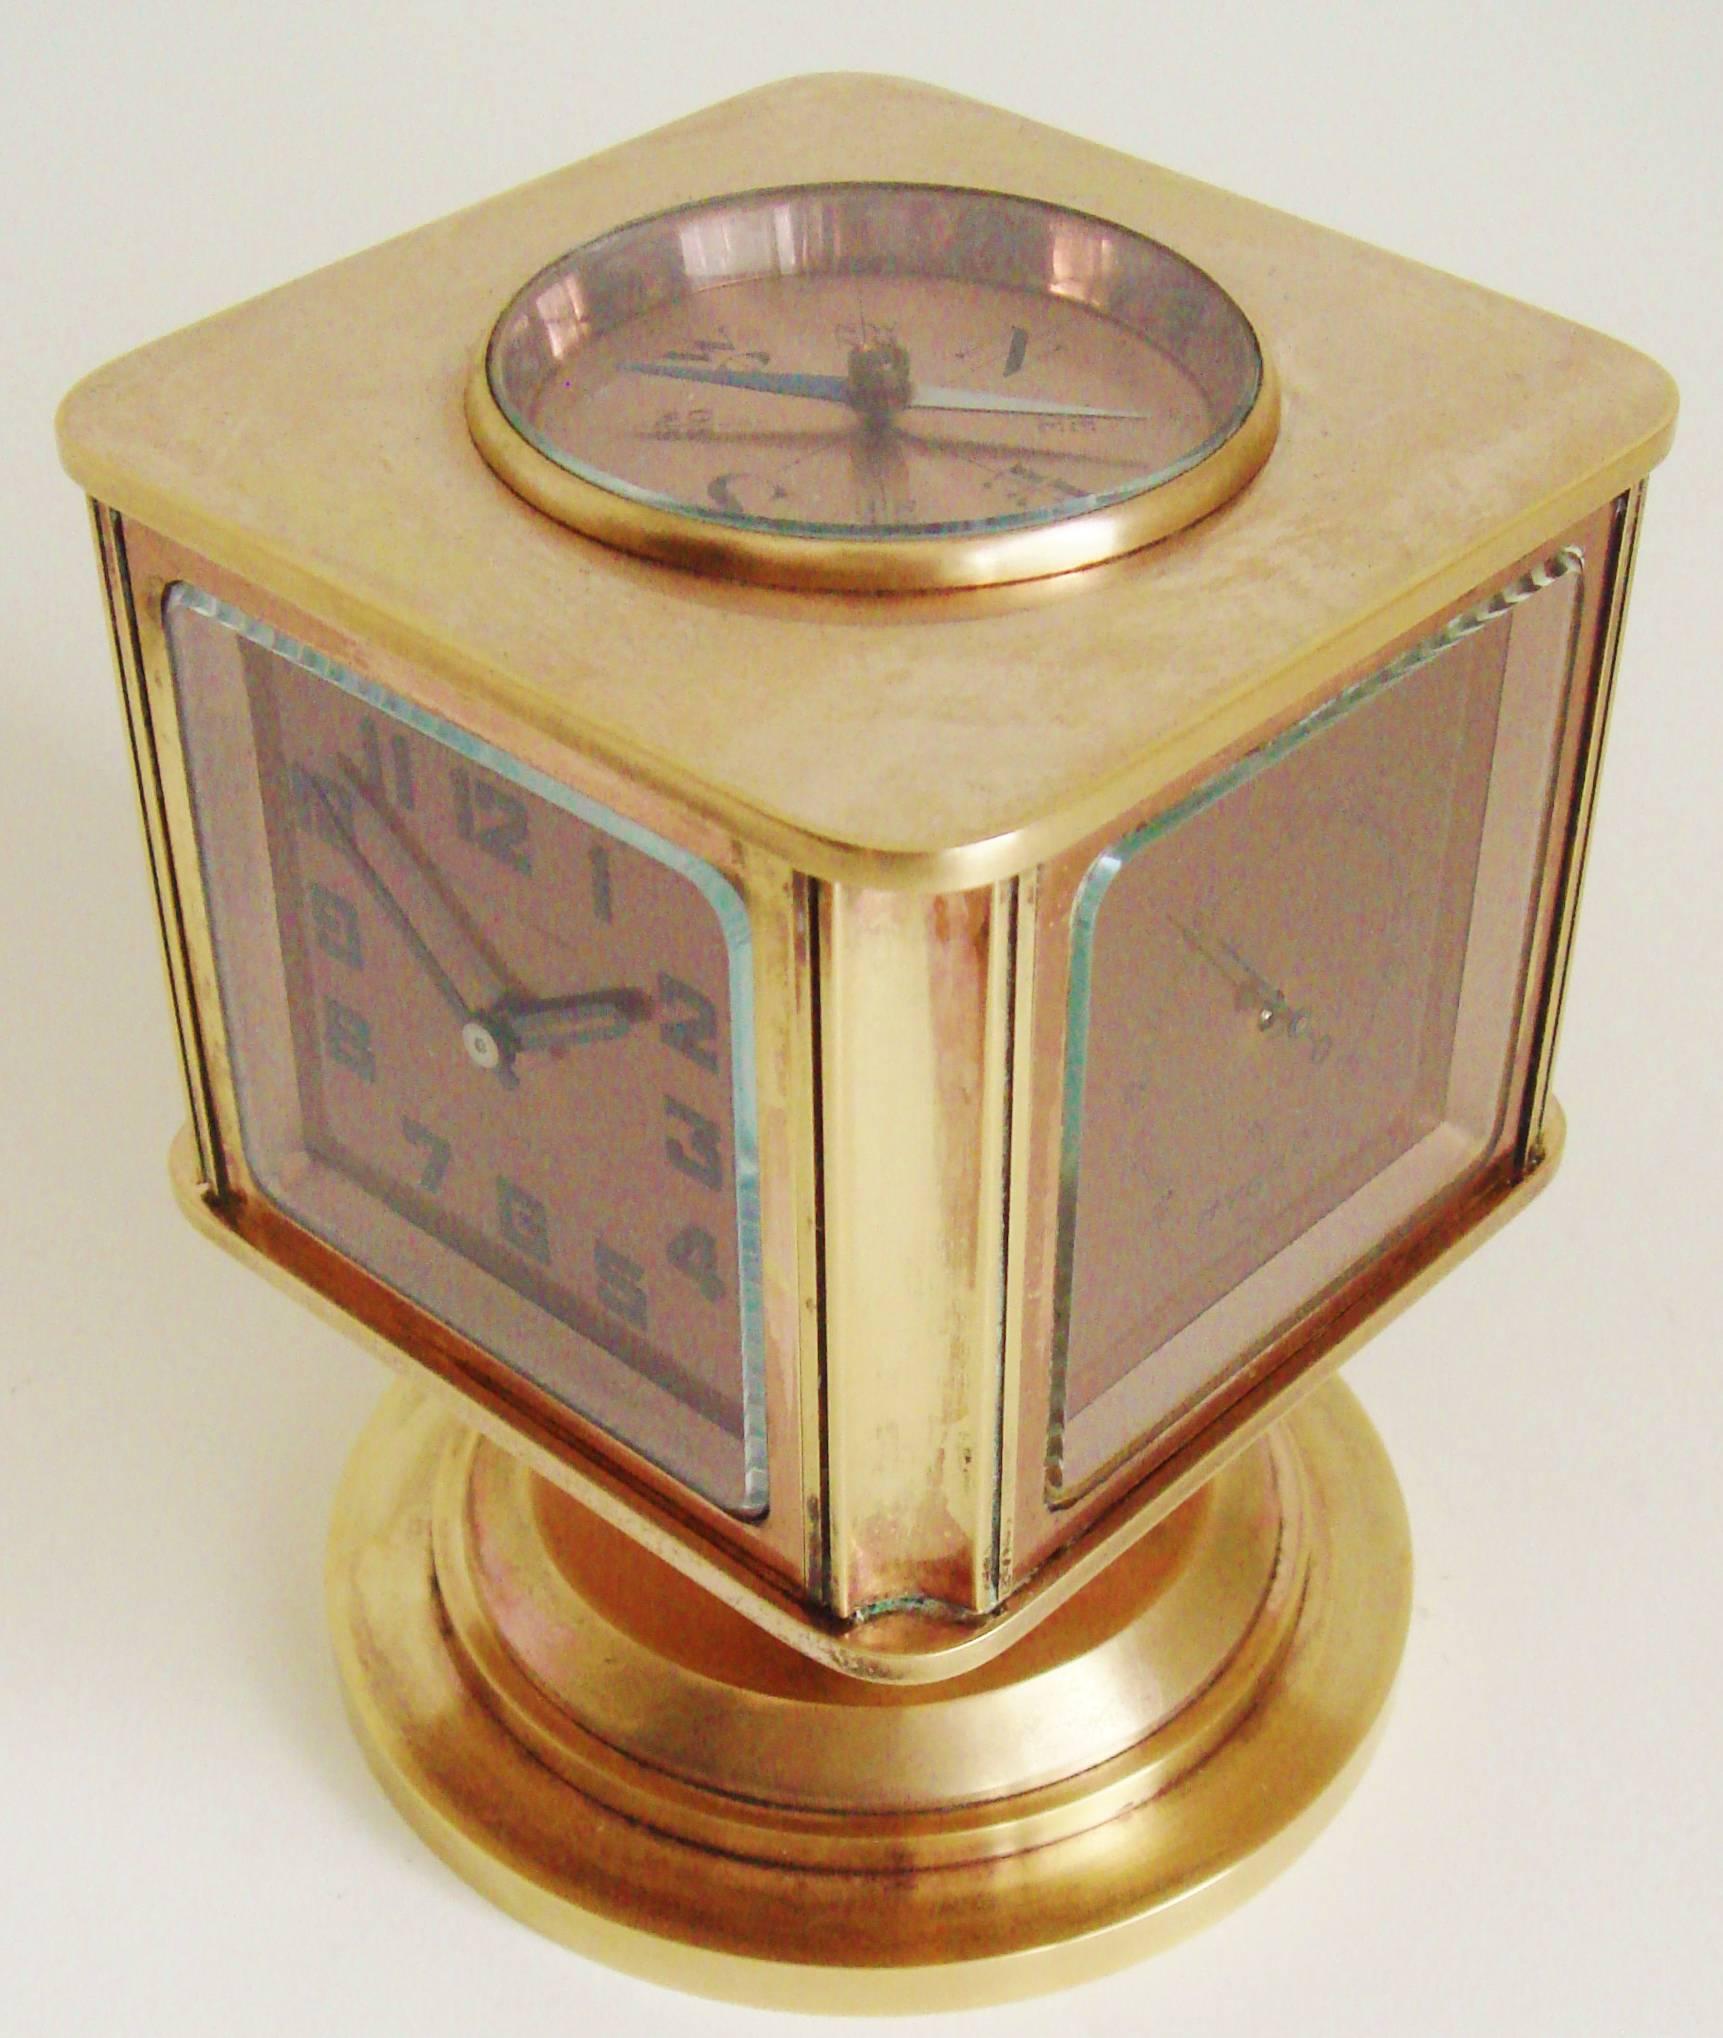 This rare Swiss Art Deco compendium five in one desk clock, Celsius or Fahrenheit thermometer, barometer, hygrometer and compass is the Meteo by the Angelus Watch Company. It is an earlier model featuring an milled edged external crown to adjust the